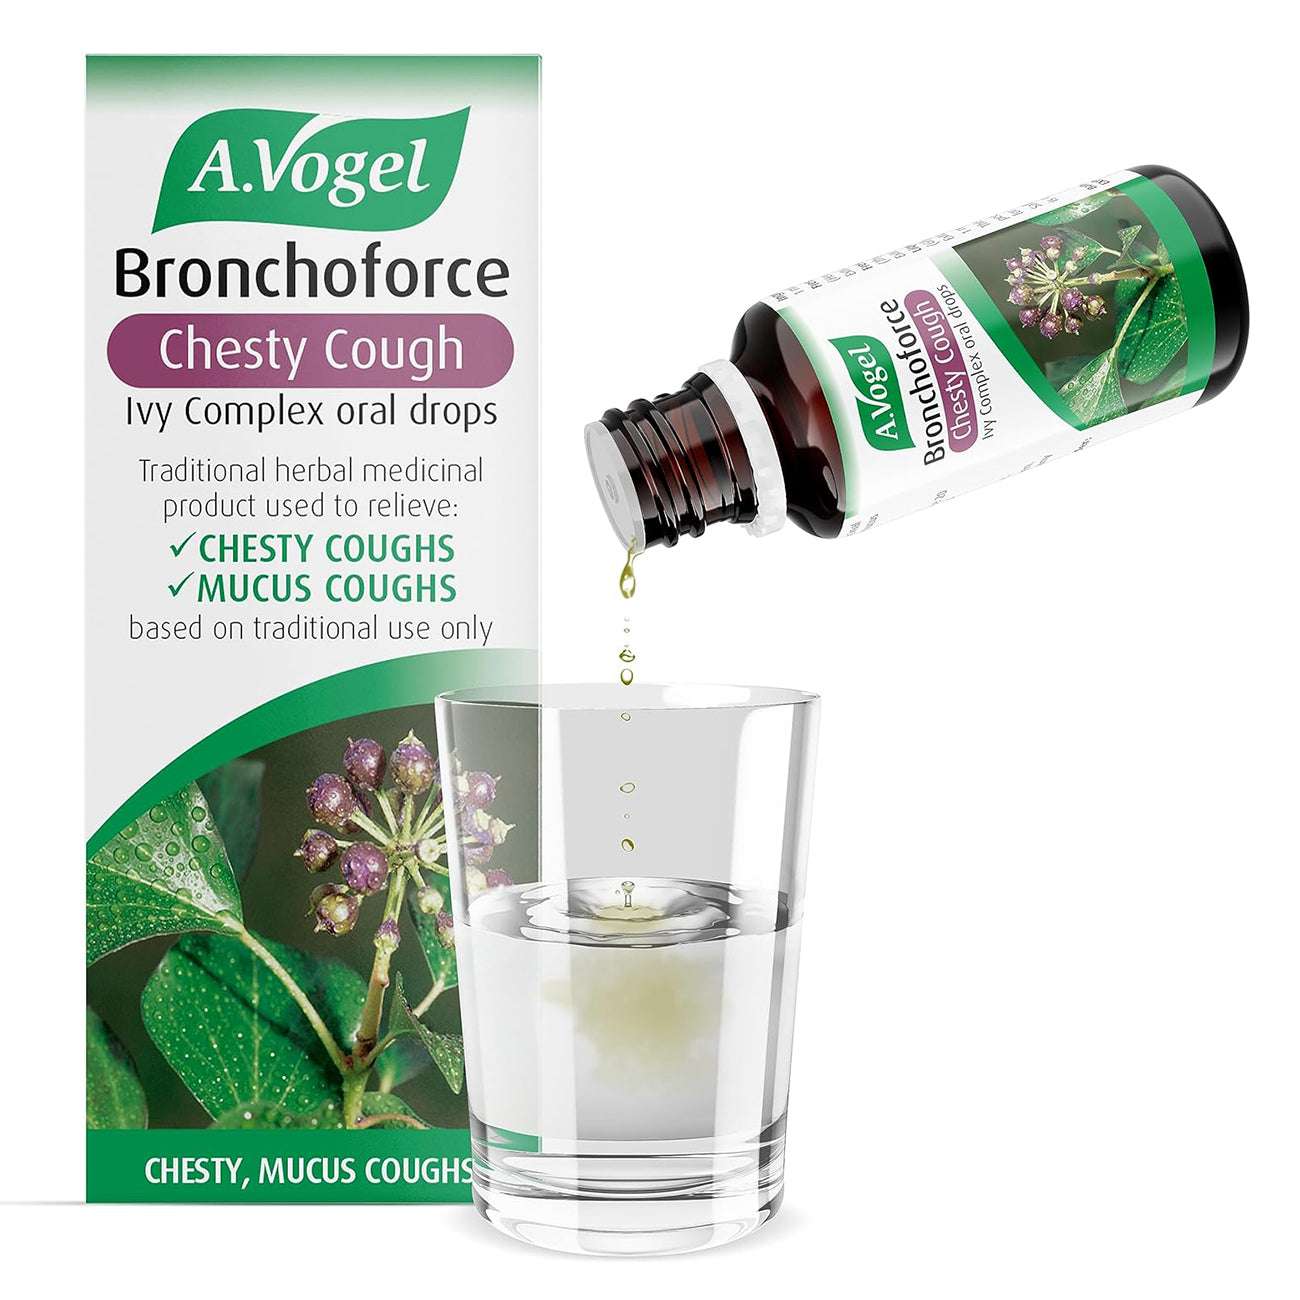 Bronchoforce Chesty Cough Ivy Complex Oral Drop 50ml